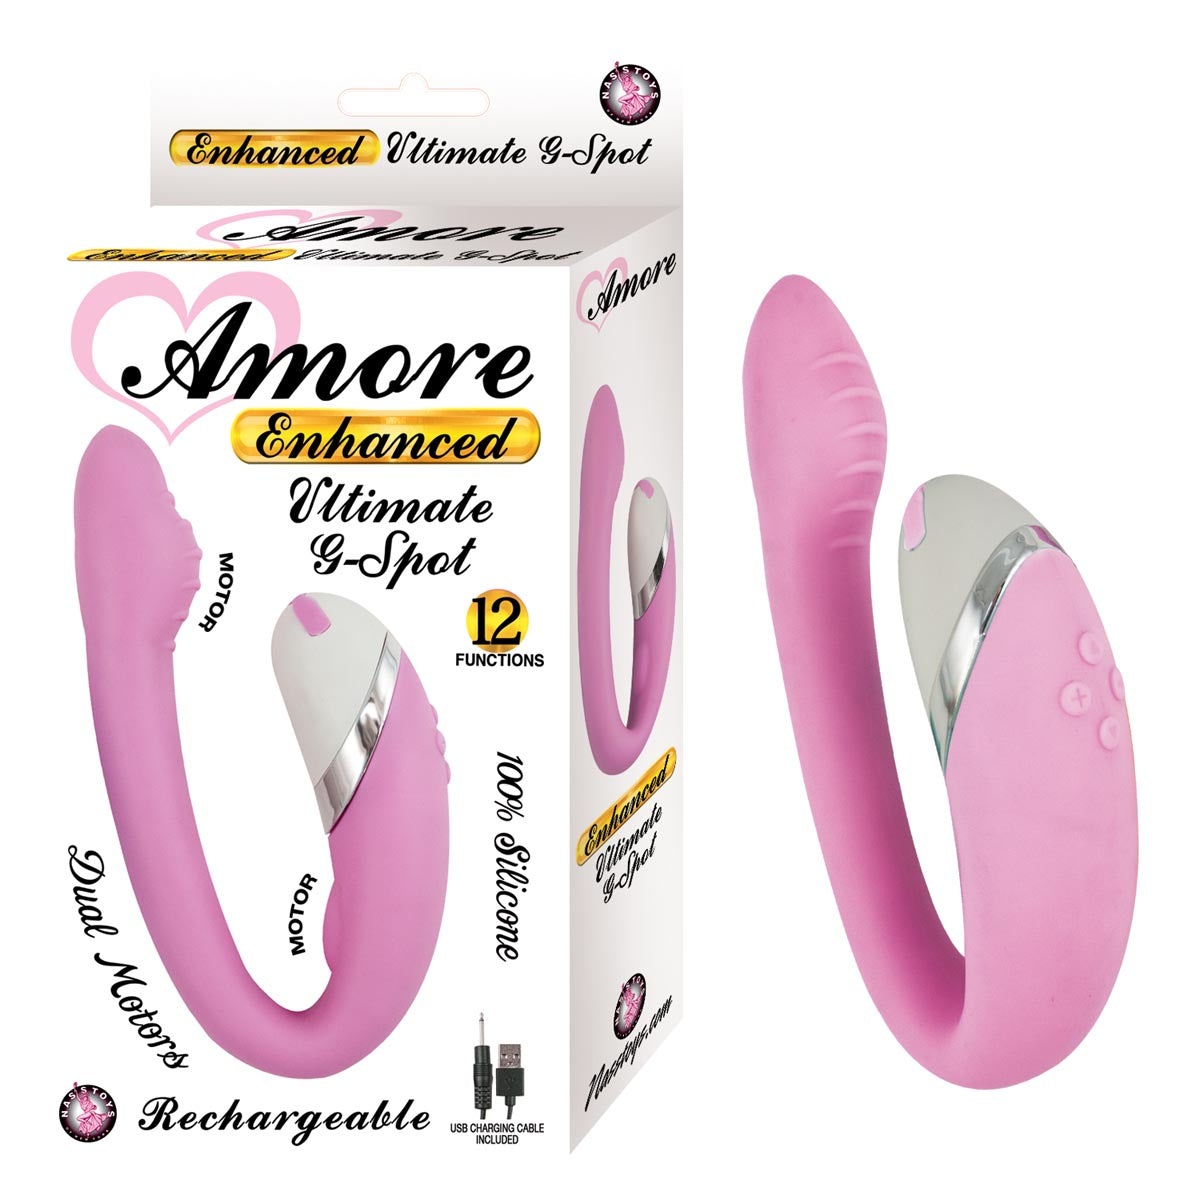 Amore ultimate G Spot |Dual Motors | Solo & Dual Play | USB | 12 Modes